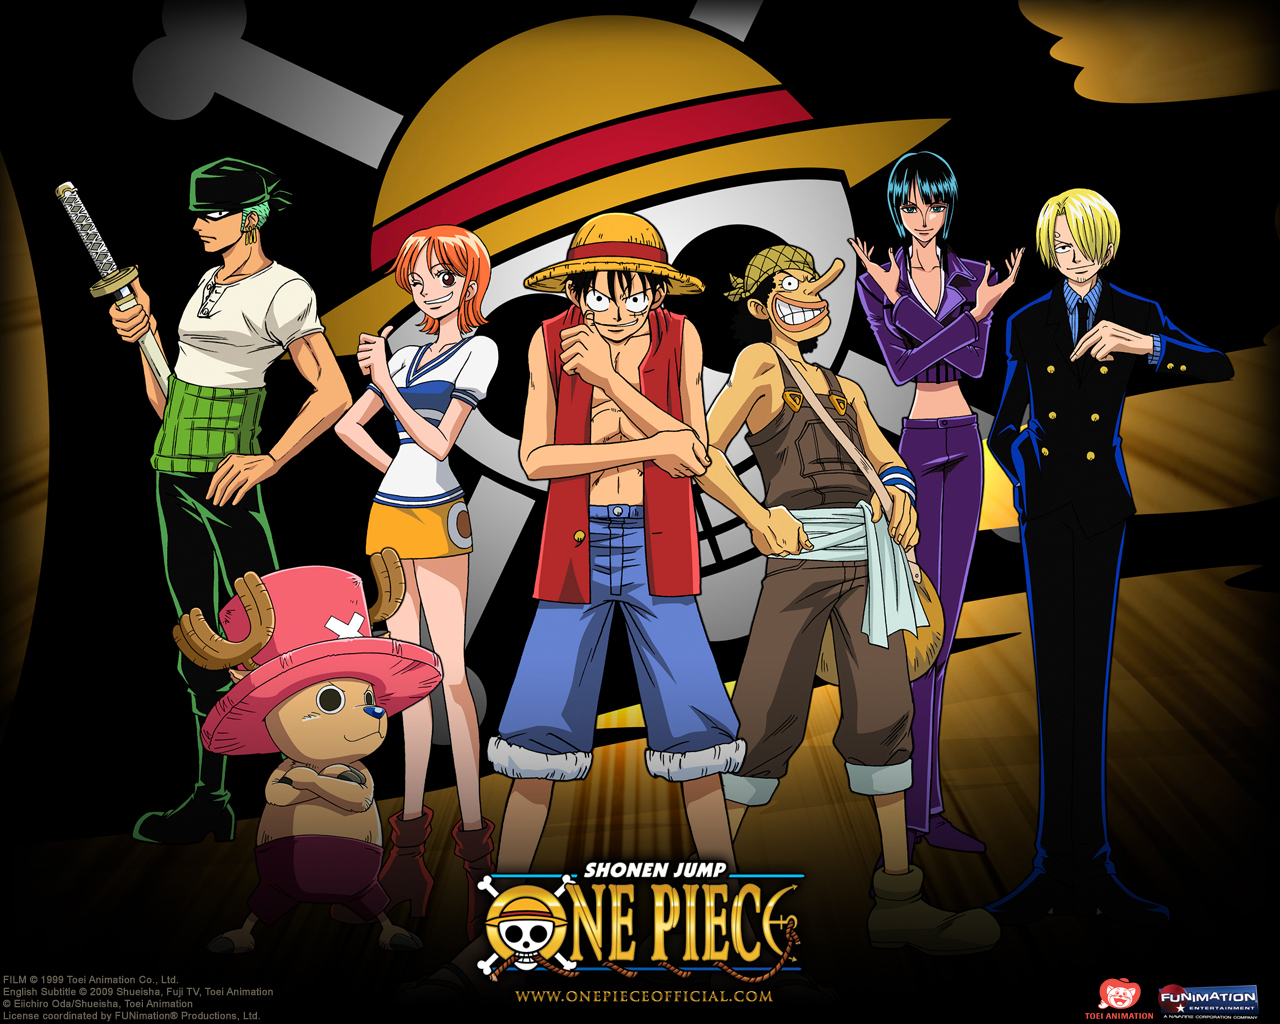 One Piece All Characters Anime Wallpapers   Design Hey Design Hey